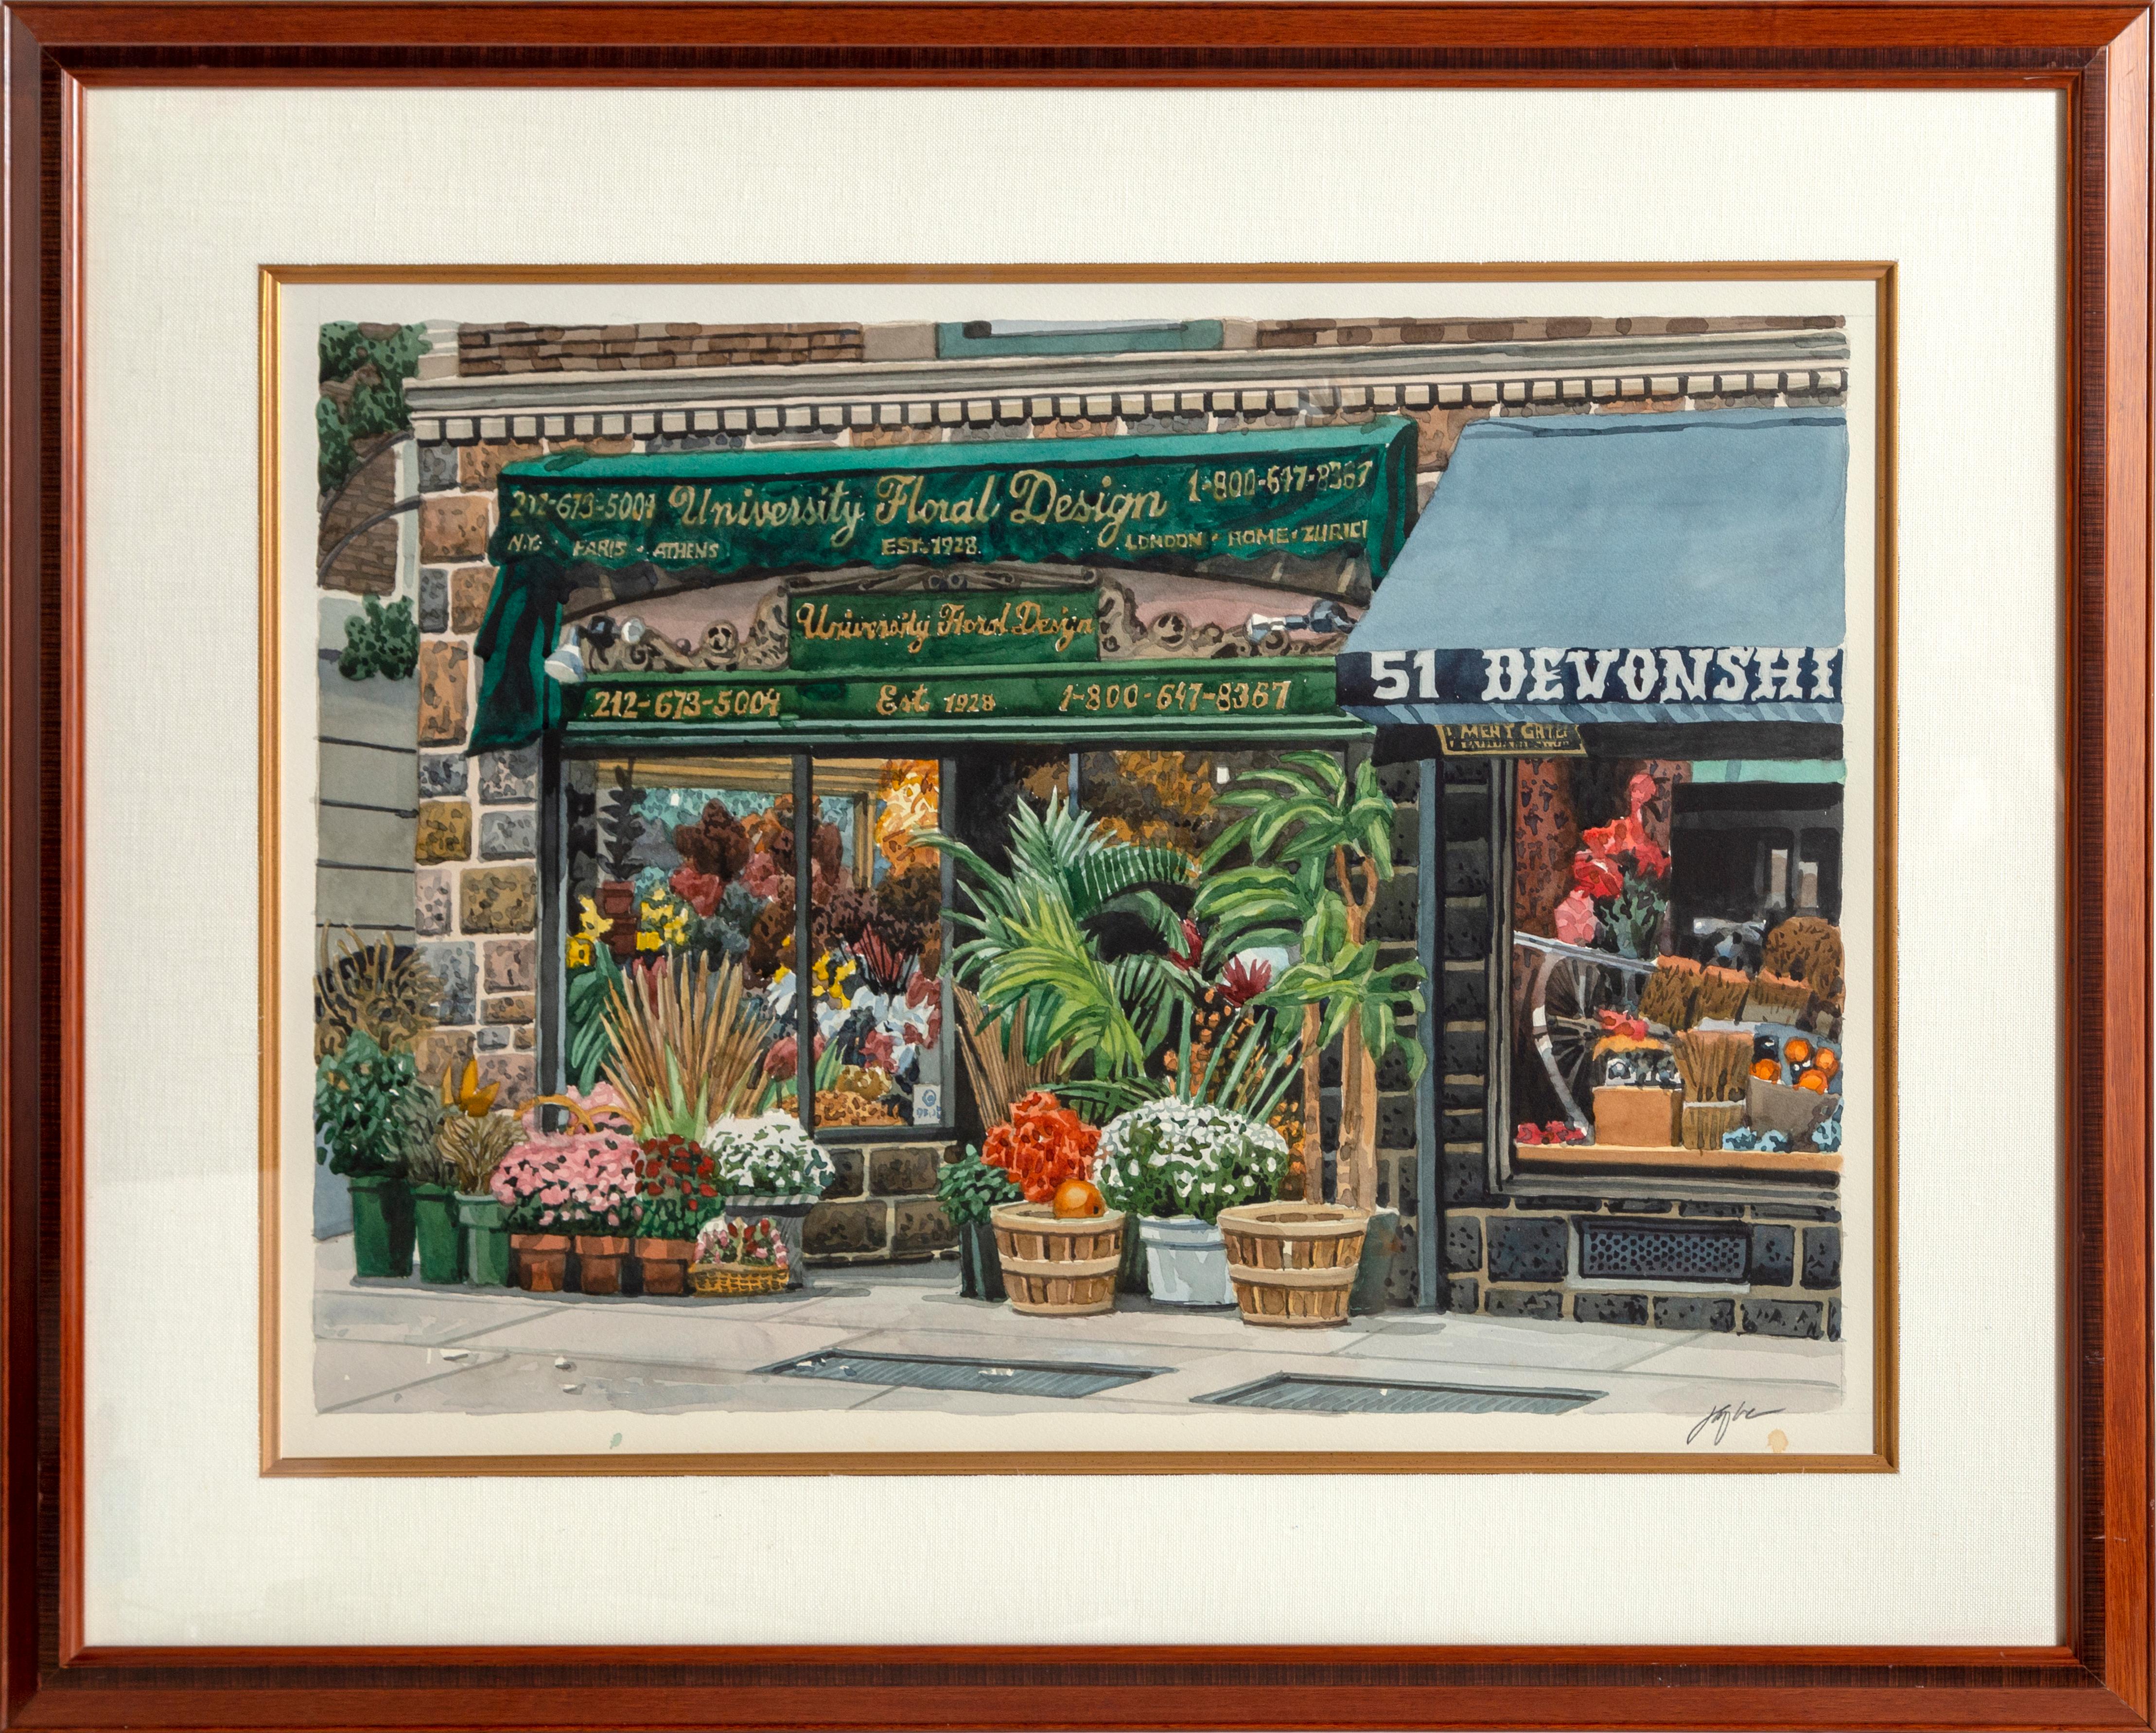 University Floral Design, Framed Photorealist Watercolor Painting